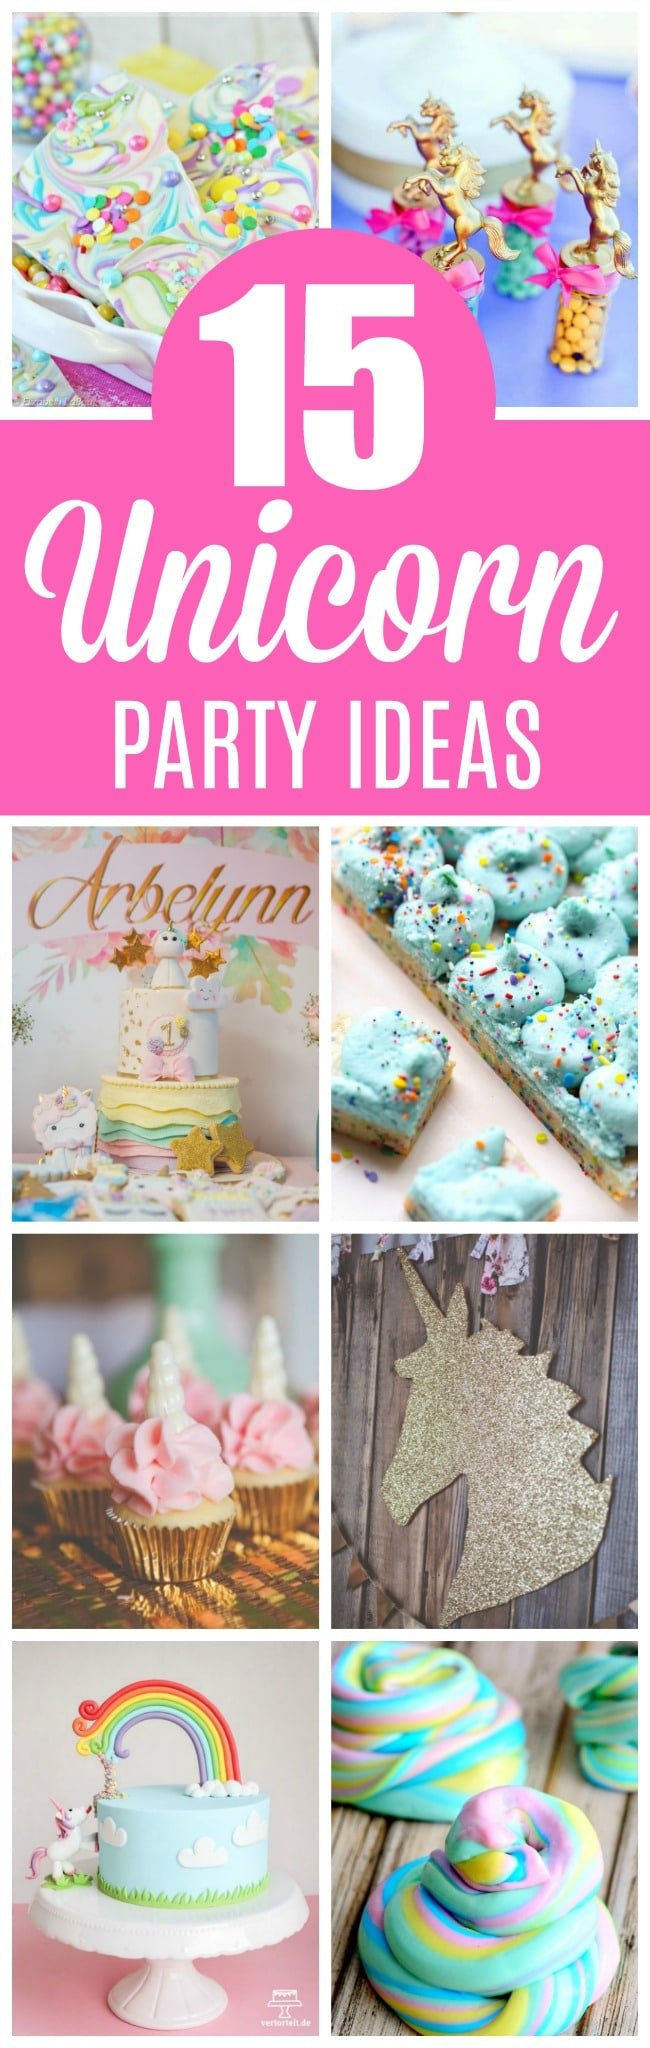 15 Magical Unicorn Party Ideas - Pretty My Party